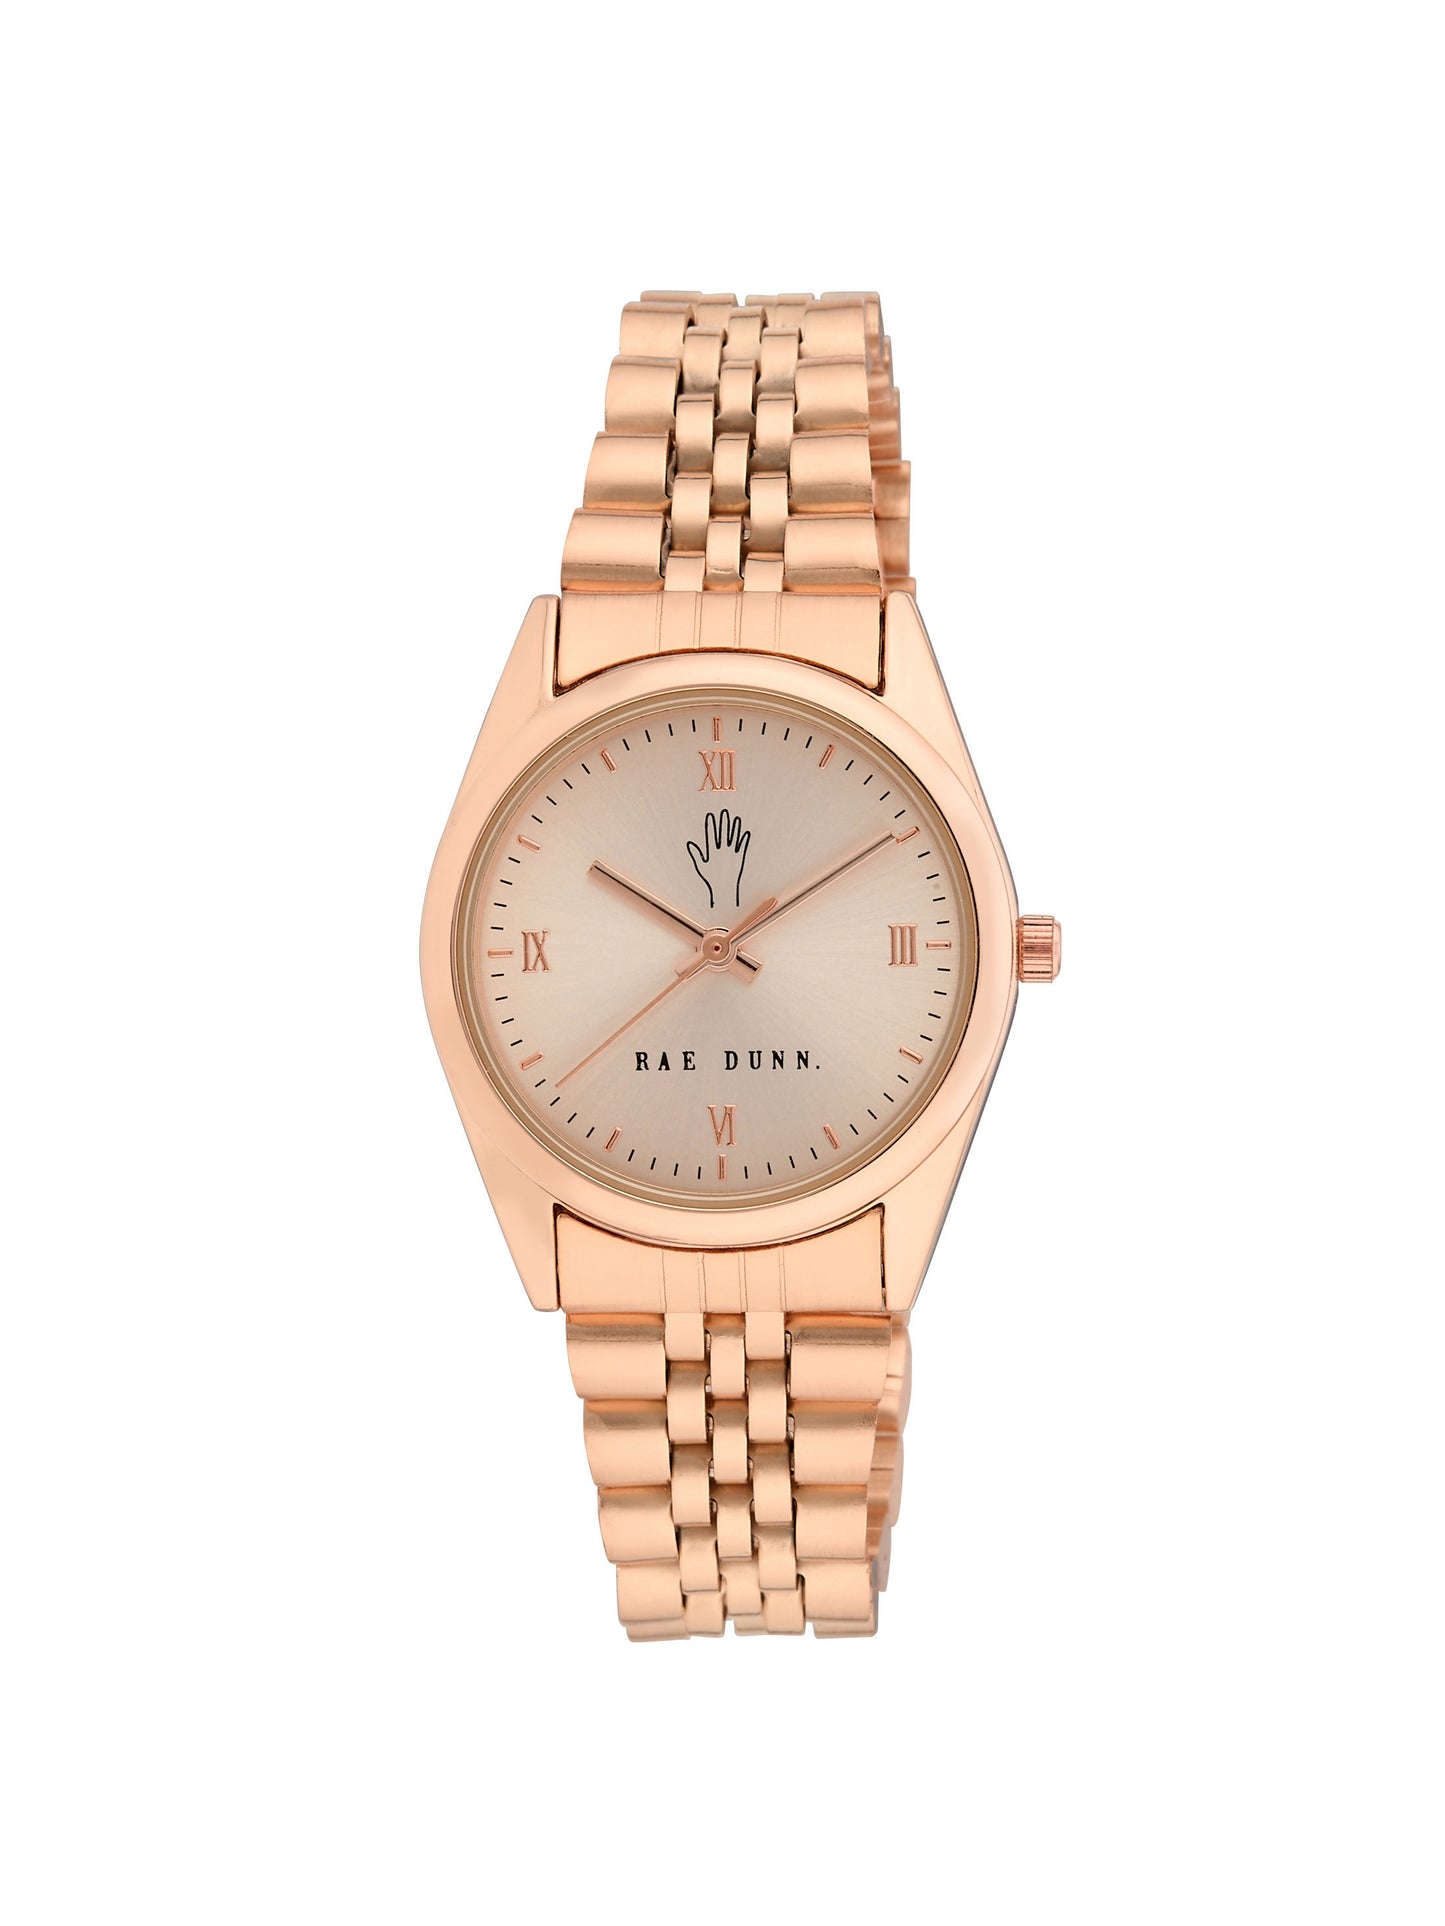 JULIA Round Face Roman Numeral Link Watch in Rose Gold, 30mm - Rae Dunn Wear - Watch